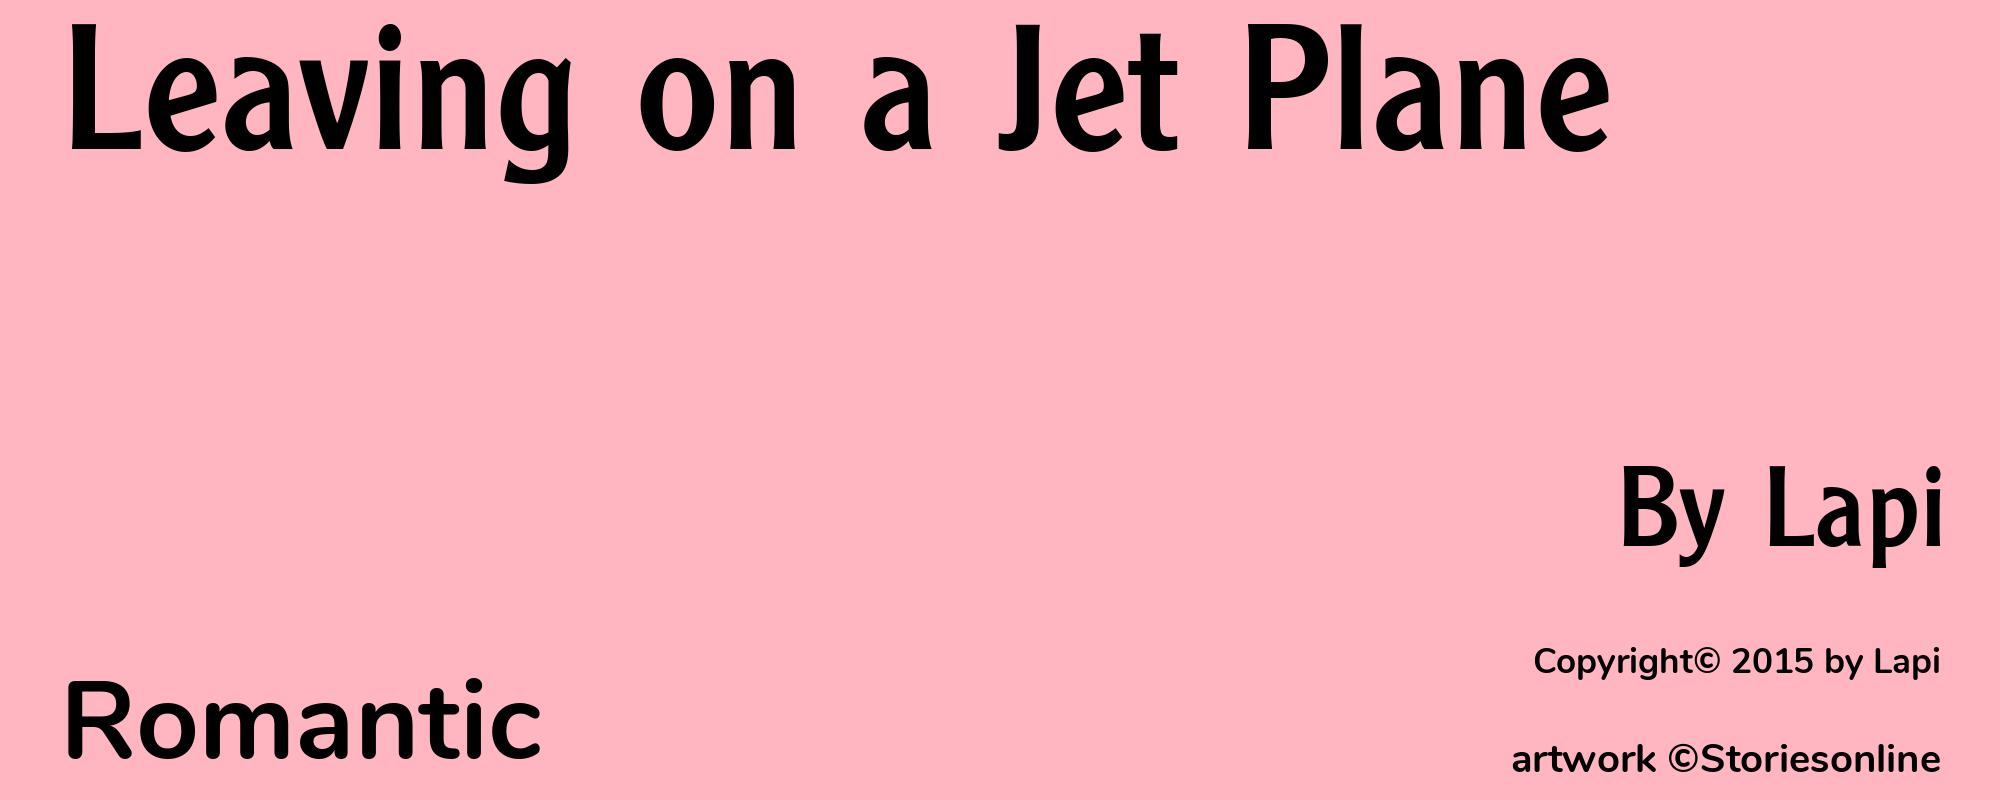 Leaving on a Jet Plane - Cover